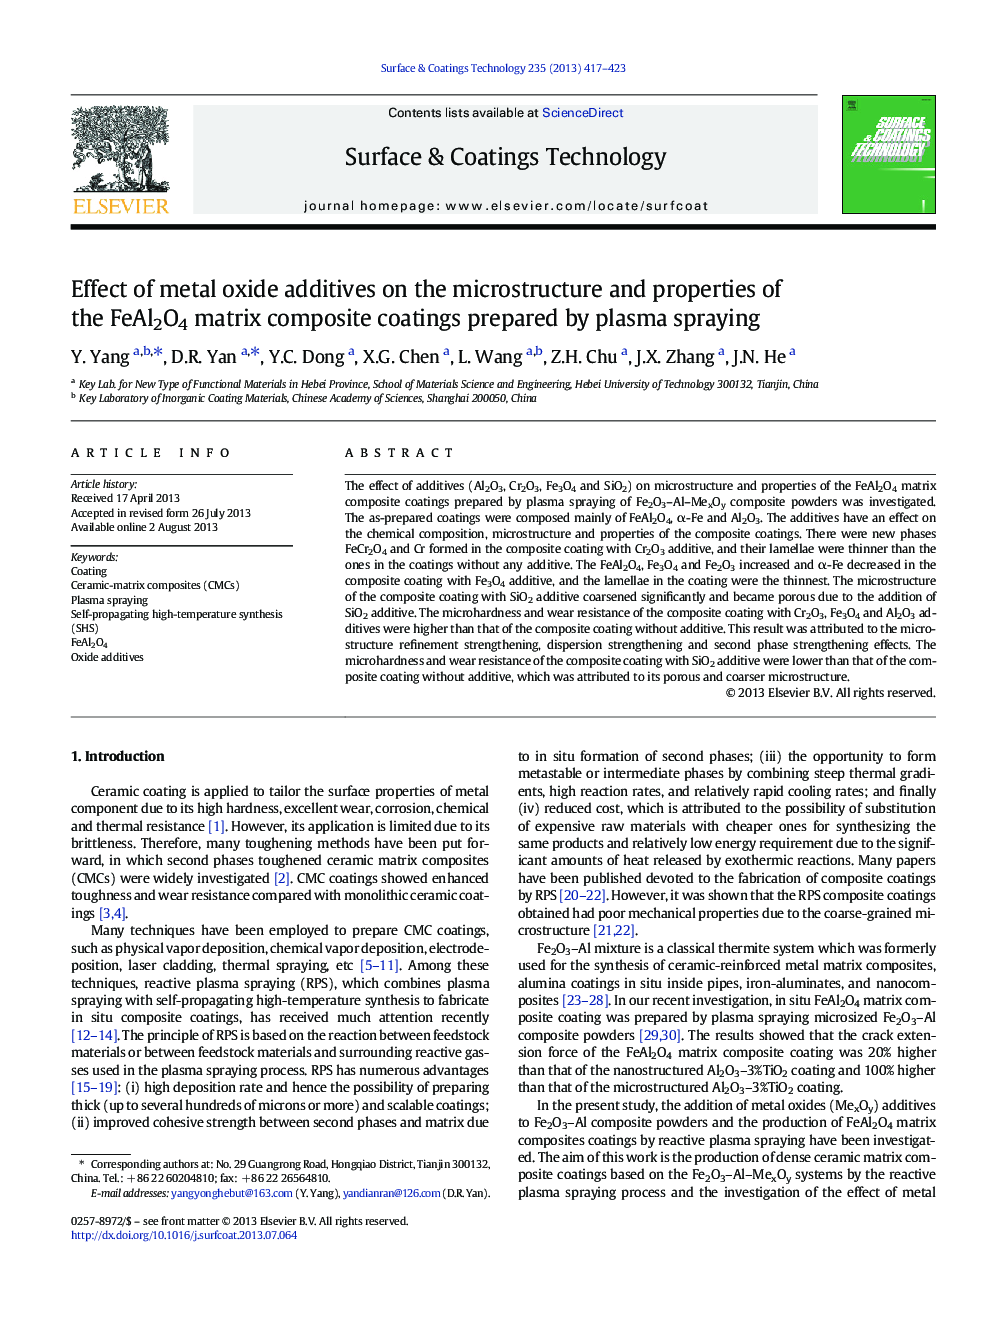 Effect of metal oxide additives on the microstructure and properties of the FeAl2O4 matrix composite coatings prepared by plasma spraying